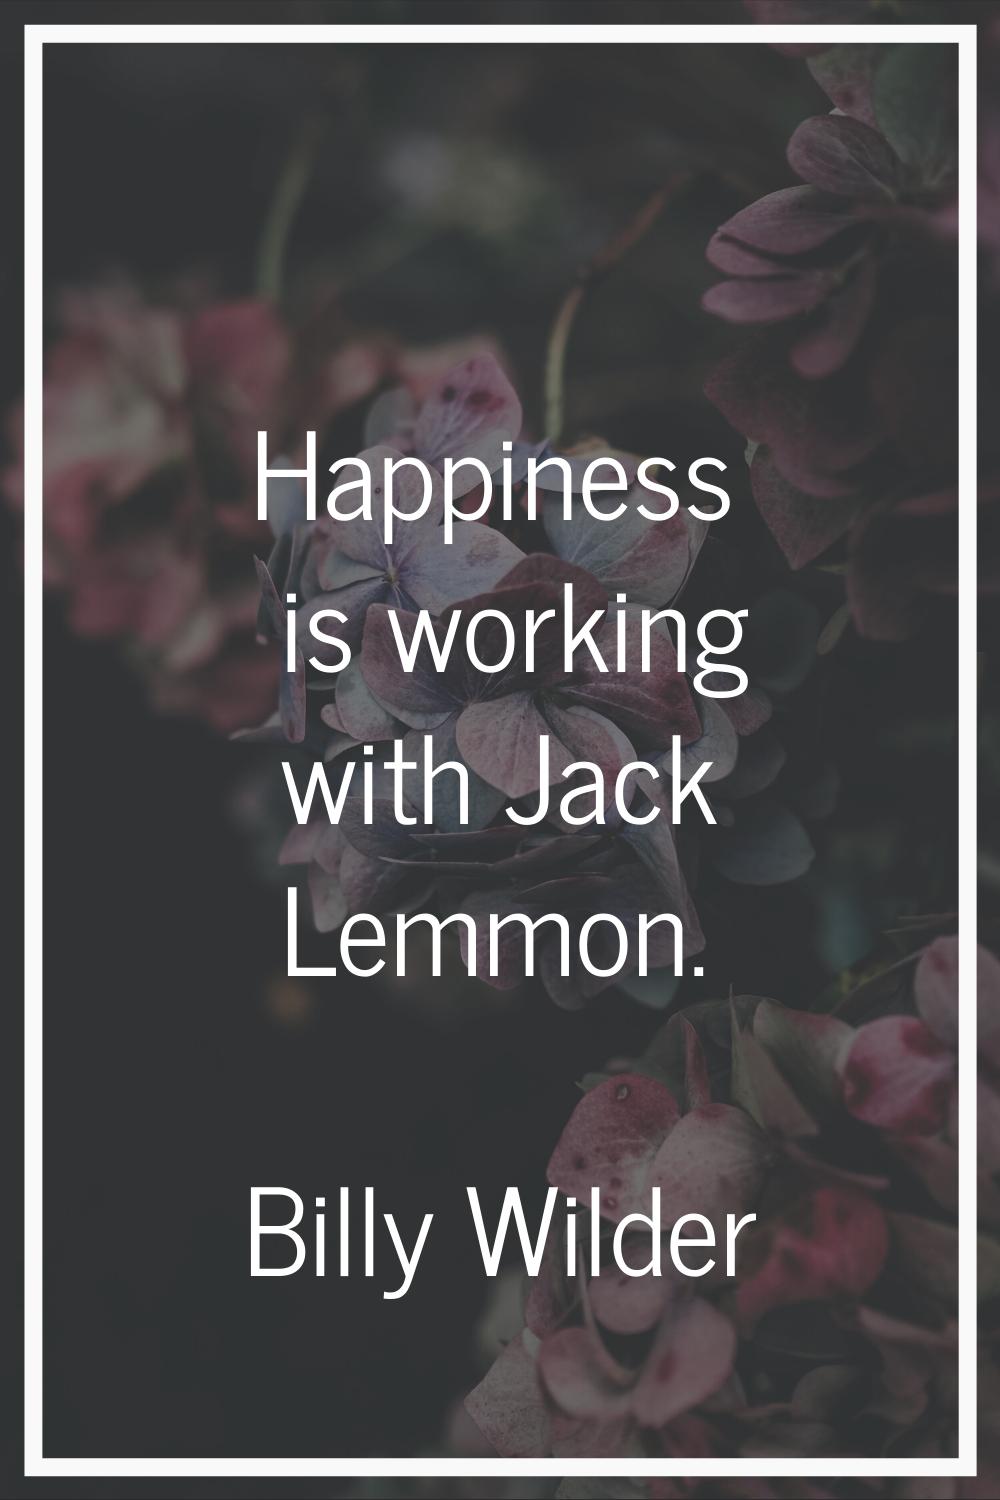 Happiness is working with Jack Lemmon.